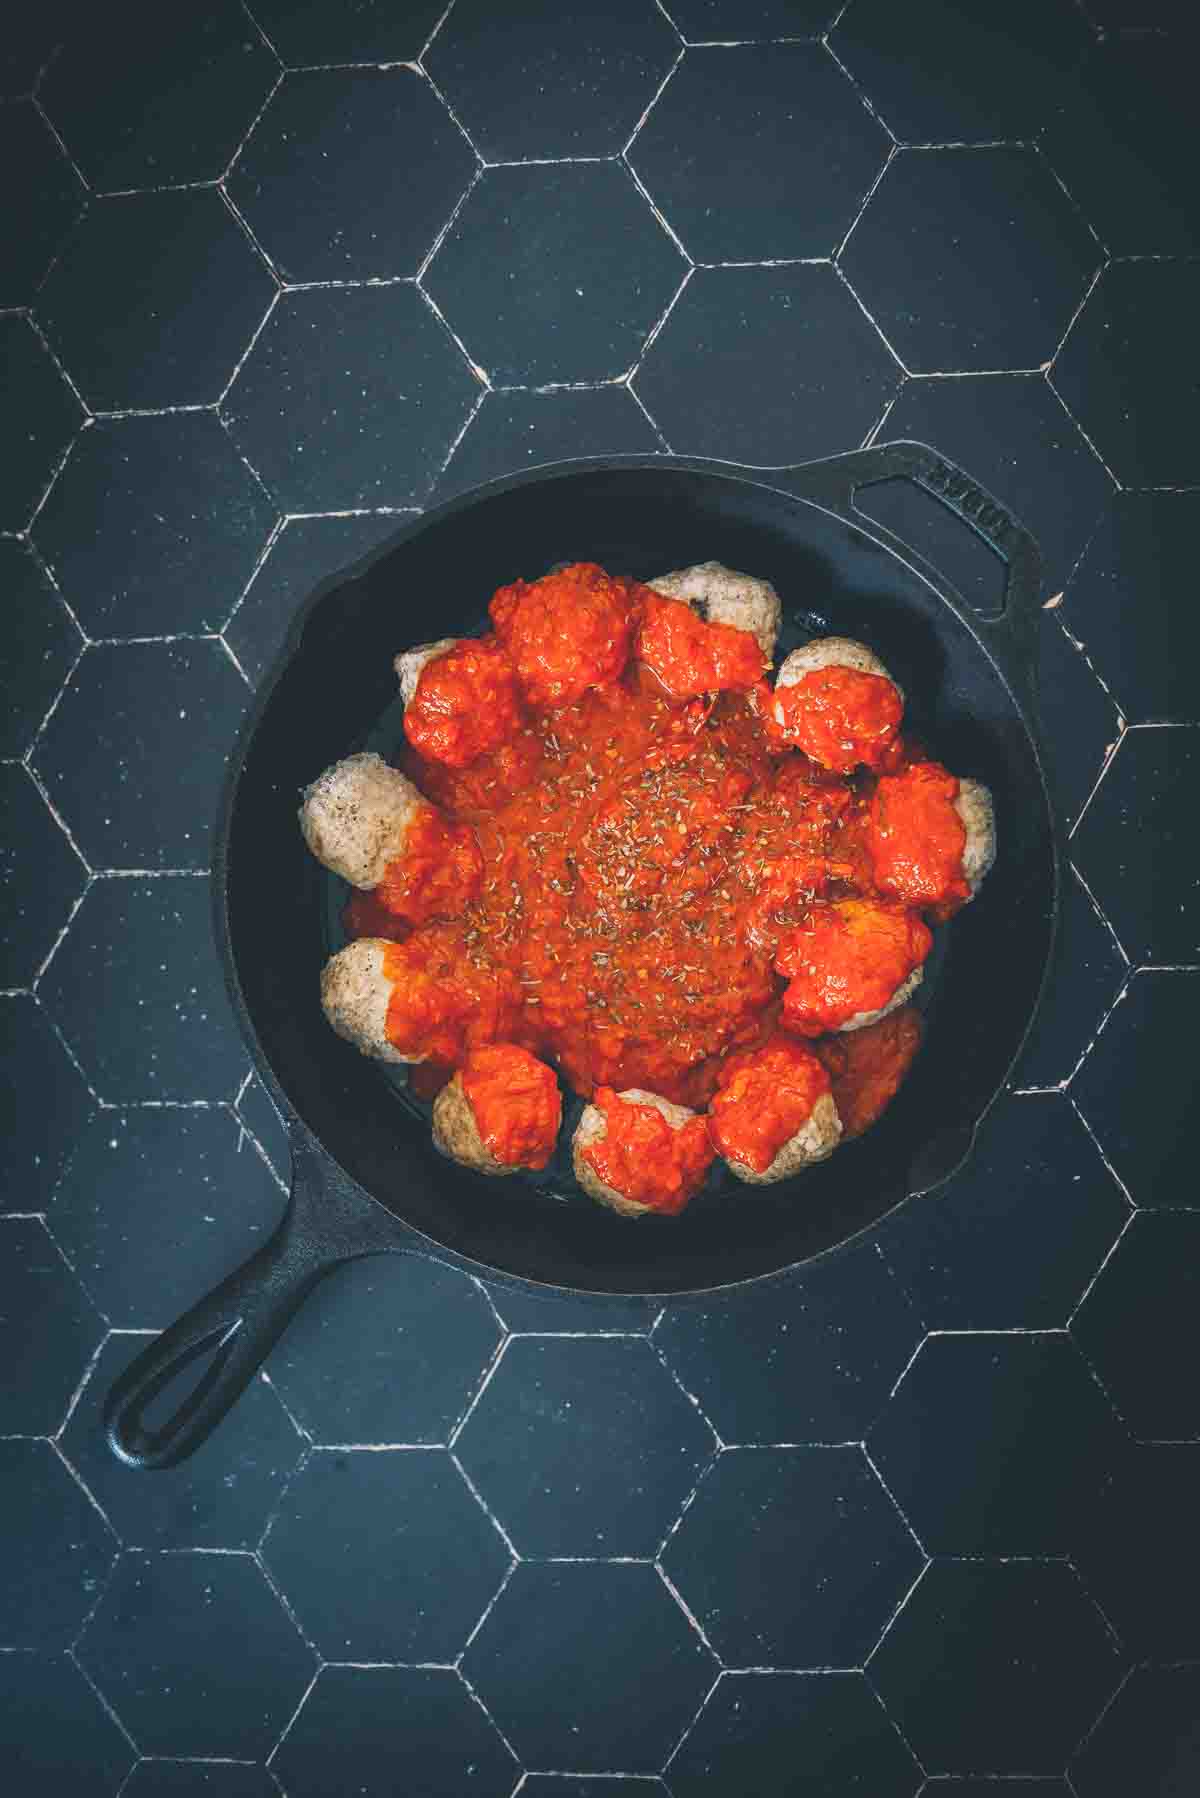 Frozen meatballs in a skillet covered in red sauce and spices. 